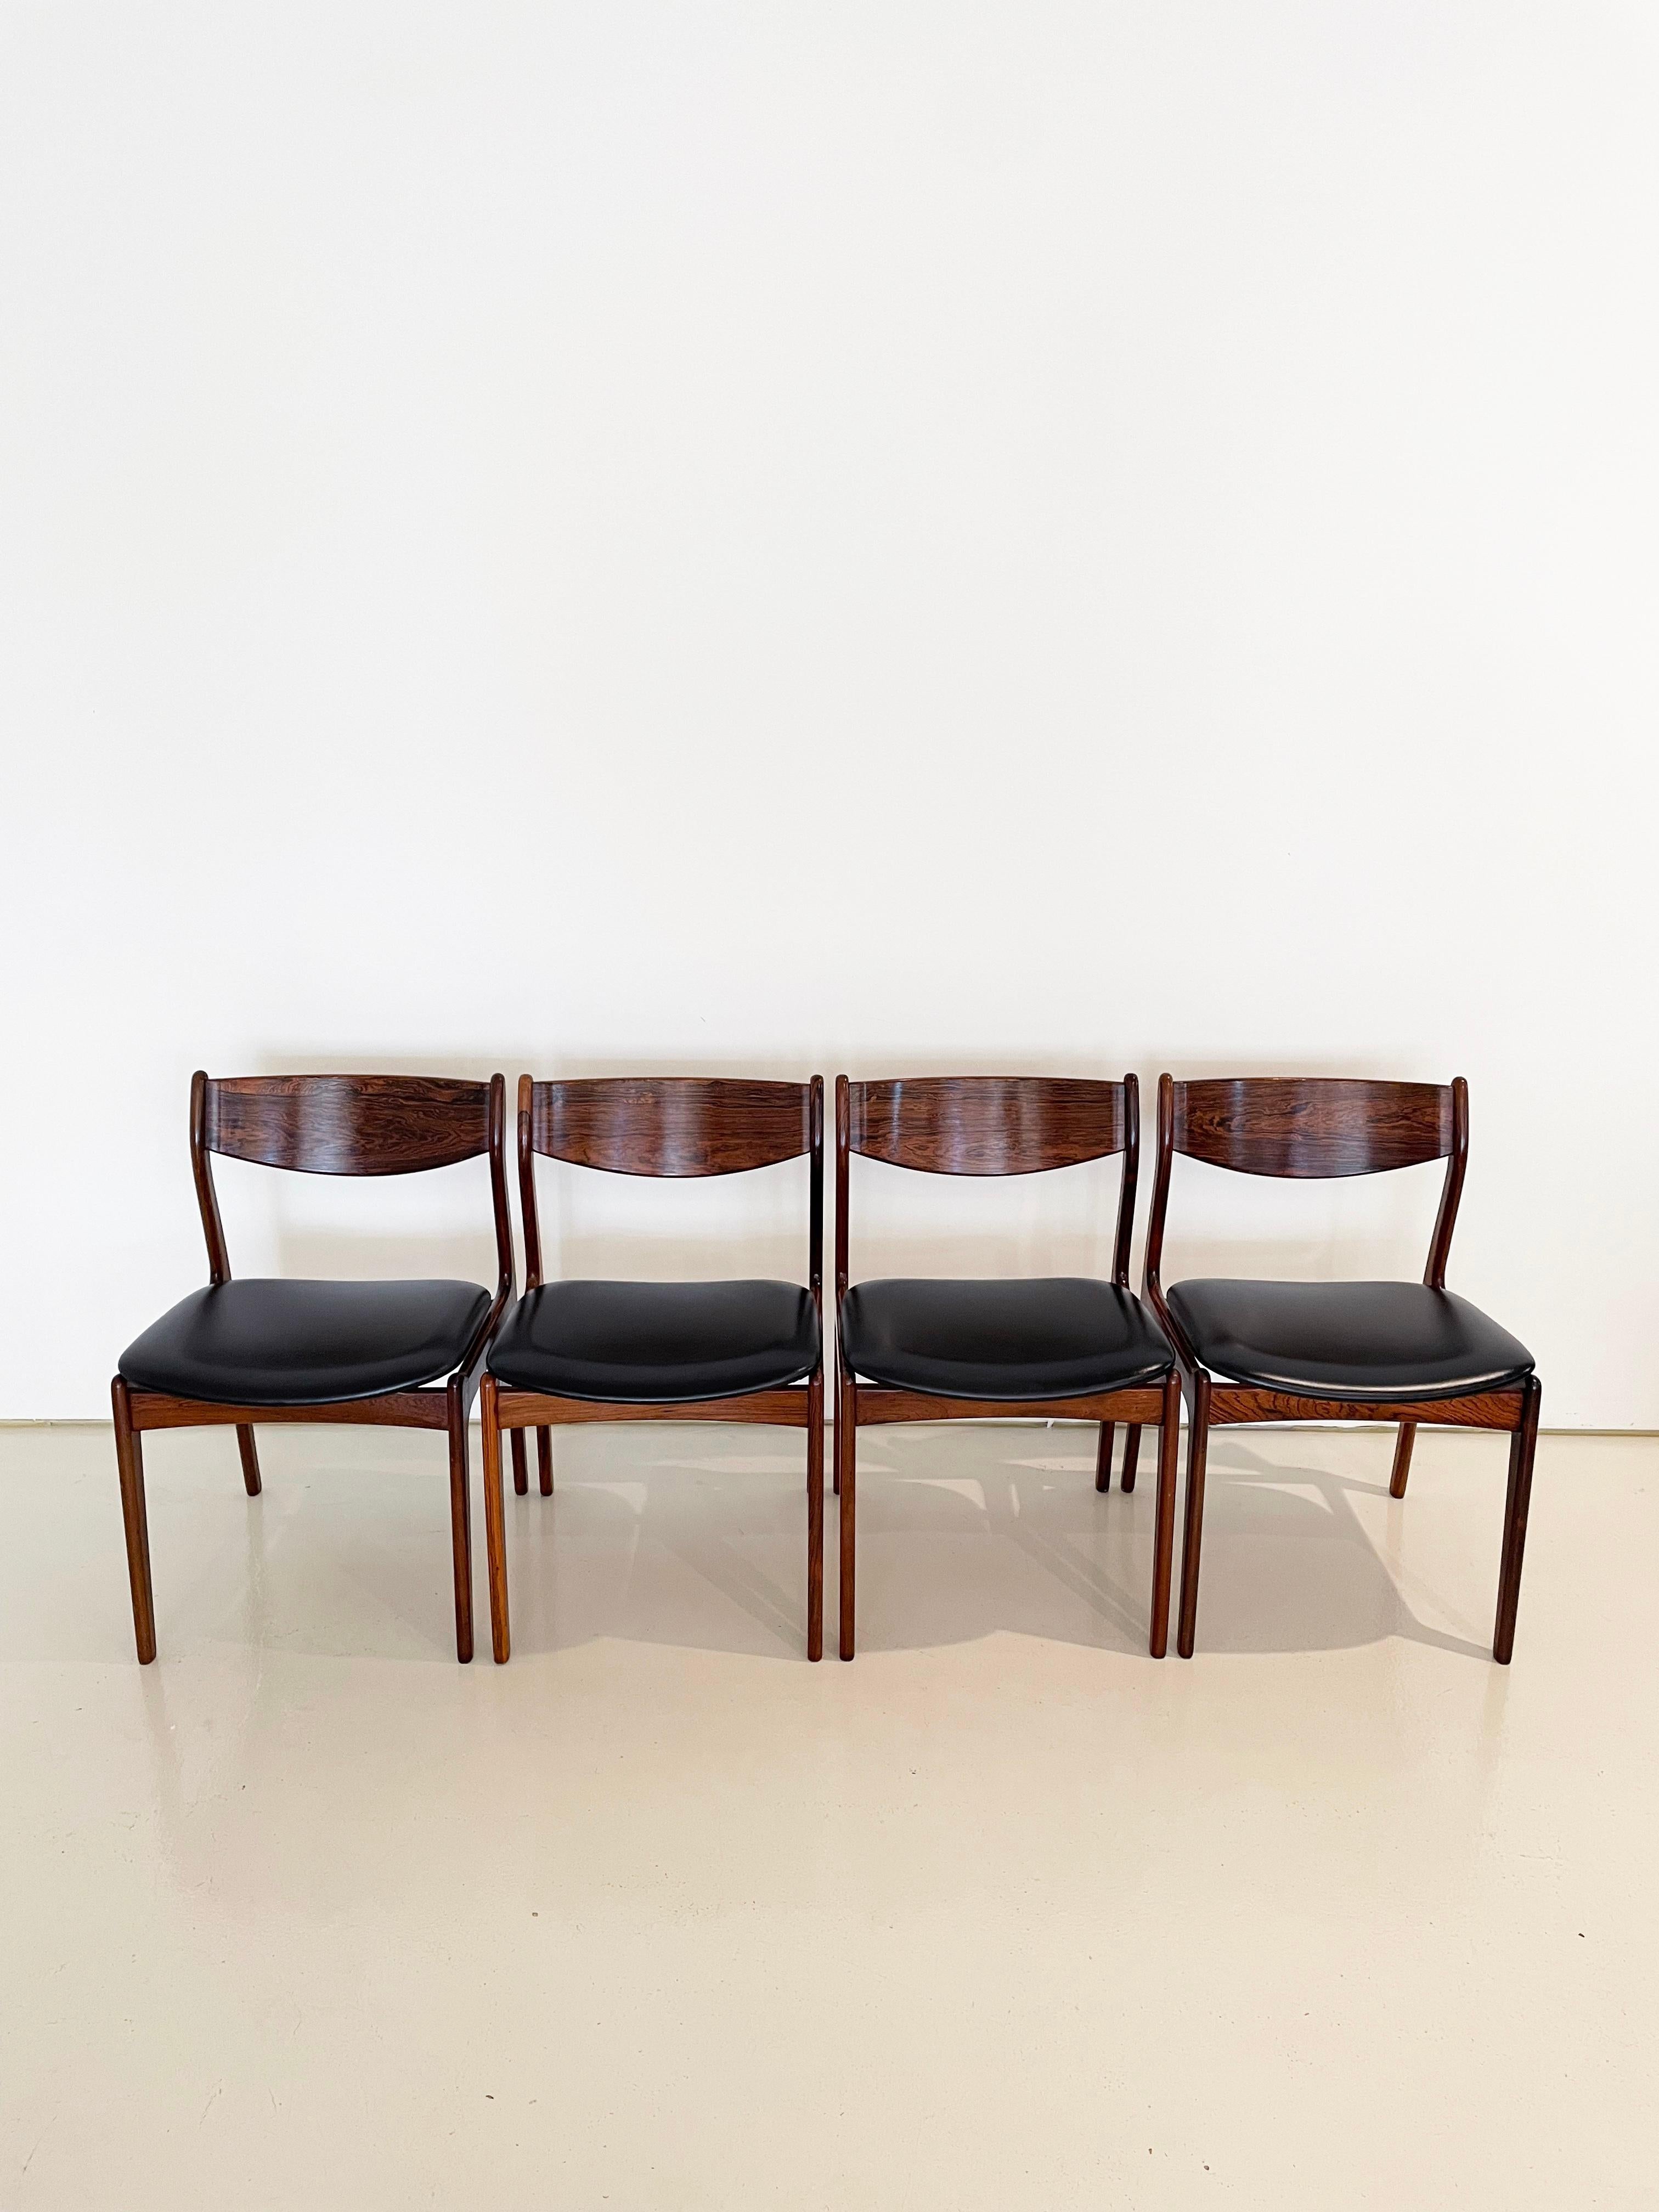 Vintage Mid-century Danish Dining Chairs, Designed by P.E. Jorgensen, Set of 8 For Sale 5